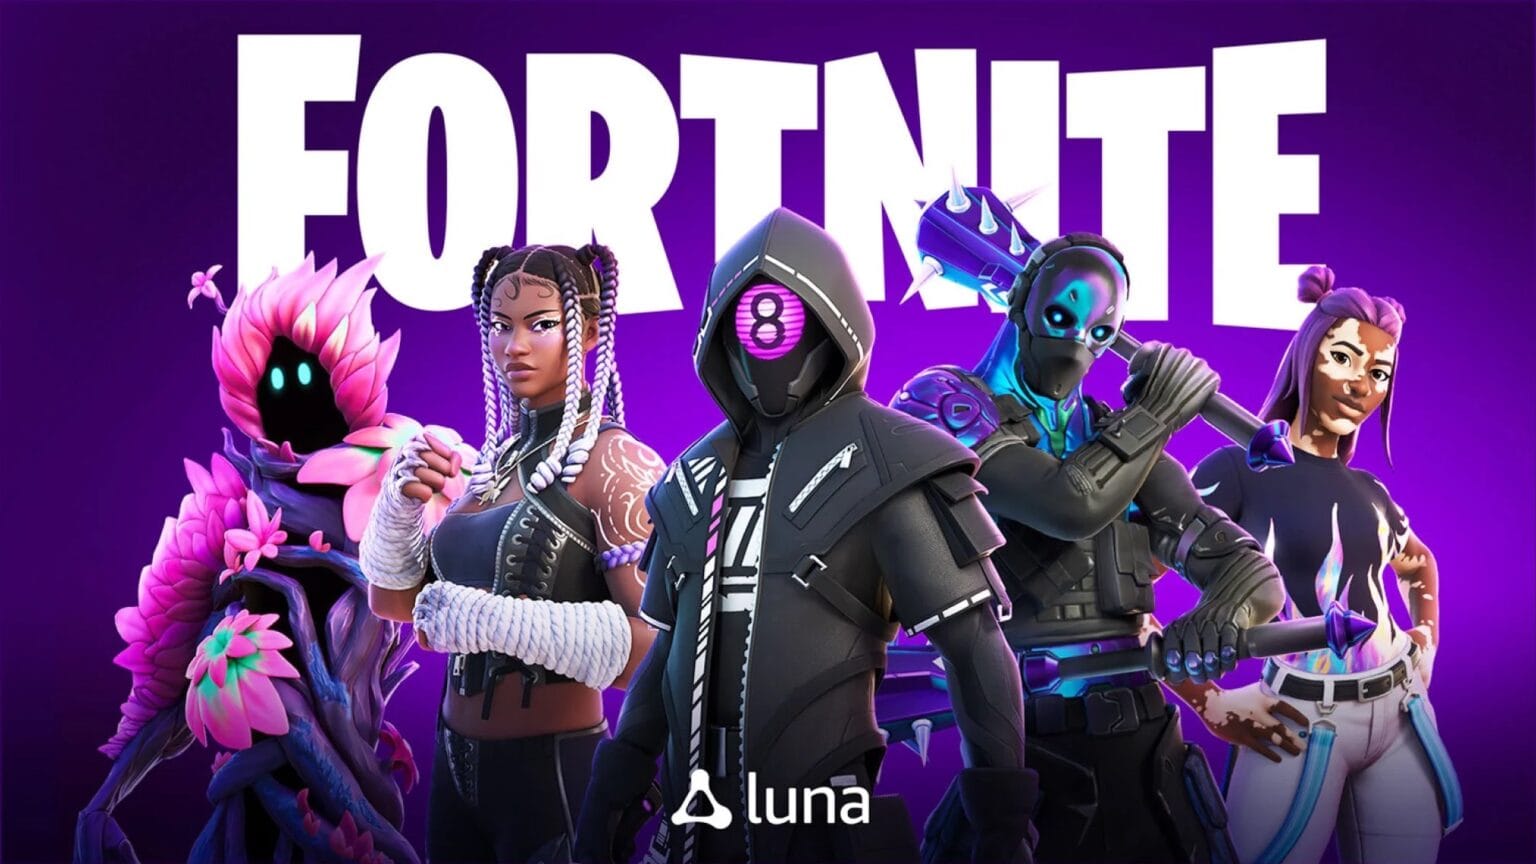 Play 'Fortnite' on your iPhone again with Amazon Luna